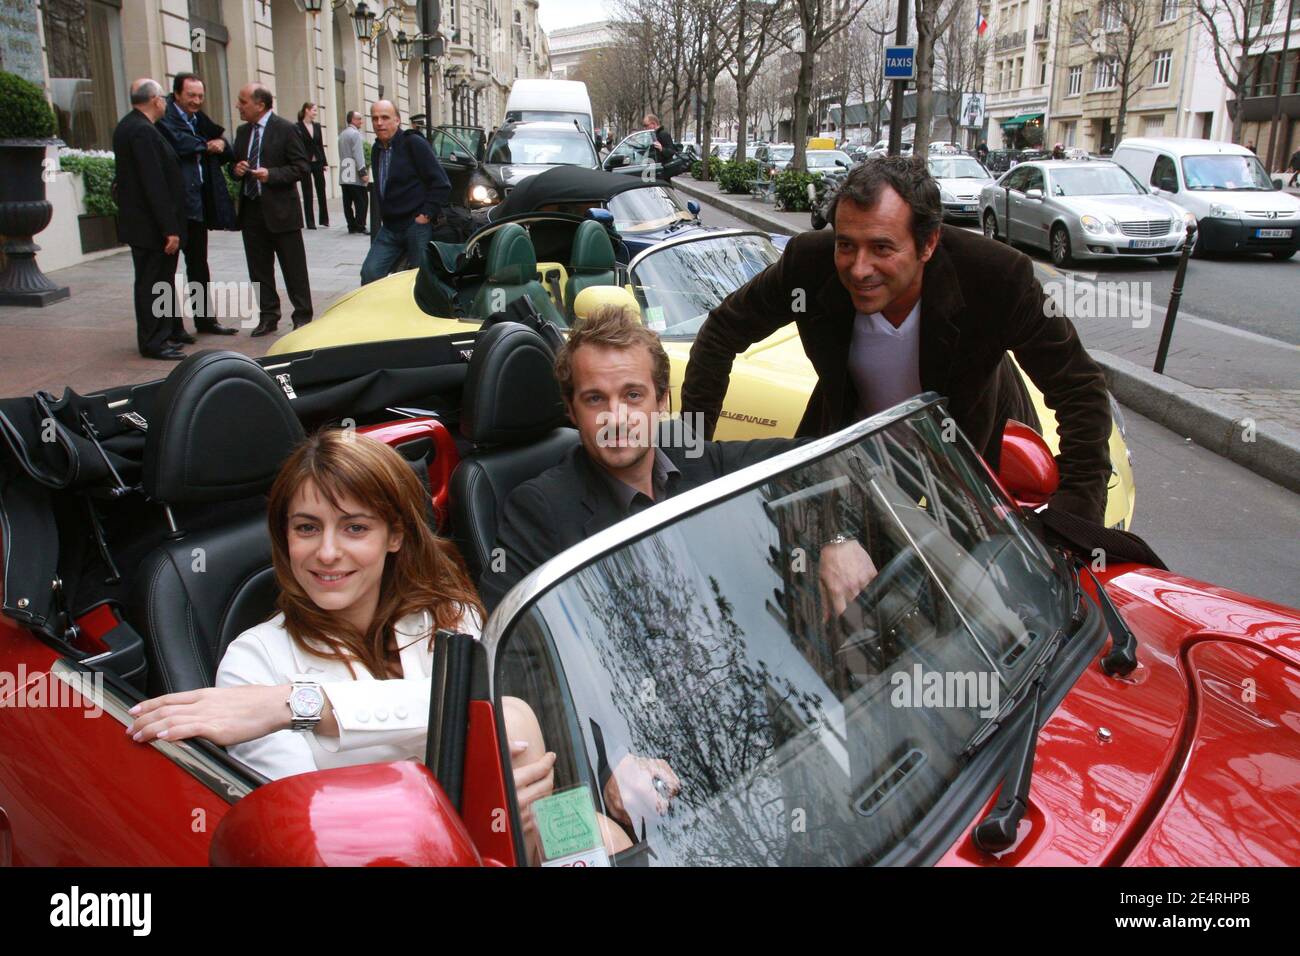 Bernard Montiel, French actors Audrey Dana and Jocelyn Quivrin, winners of cinema prize 'Prix Romy Schneider-Patrick Dewaere 2008' at the Hotel 'Royal Monceau' in Paris, France on March 17, 2008 prior to the official award ceremony. Photo by Benoit Pinguet/ABACAPRESS.COM Stock Photo